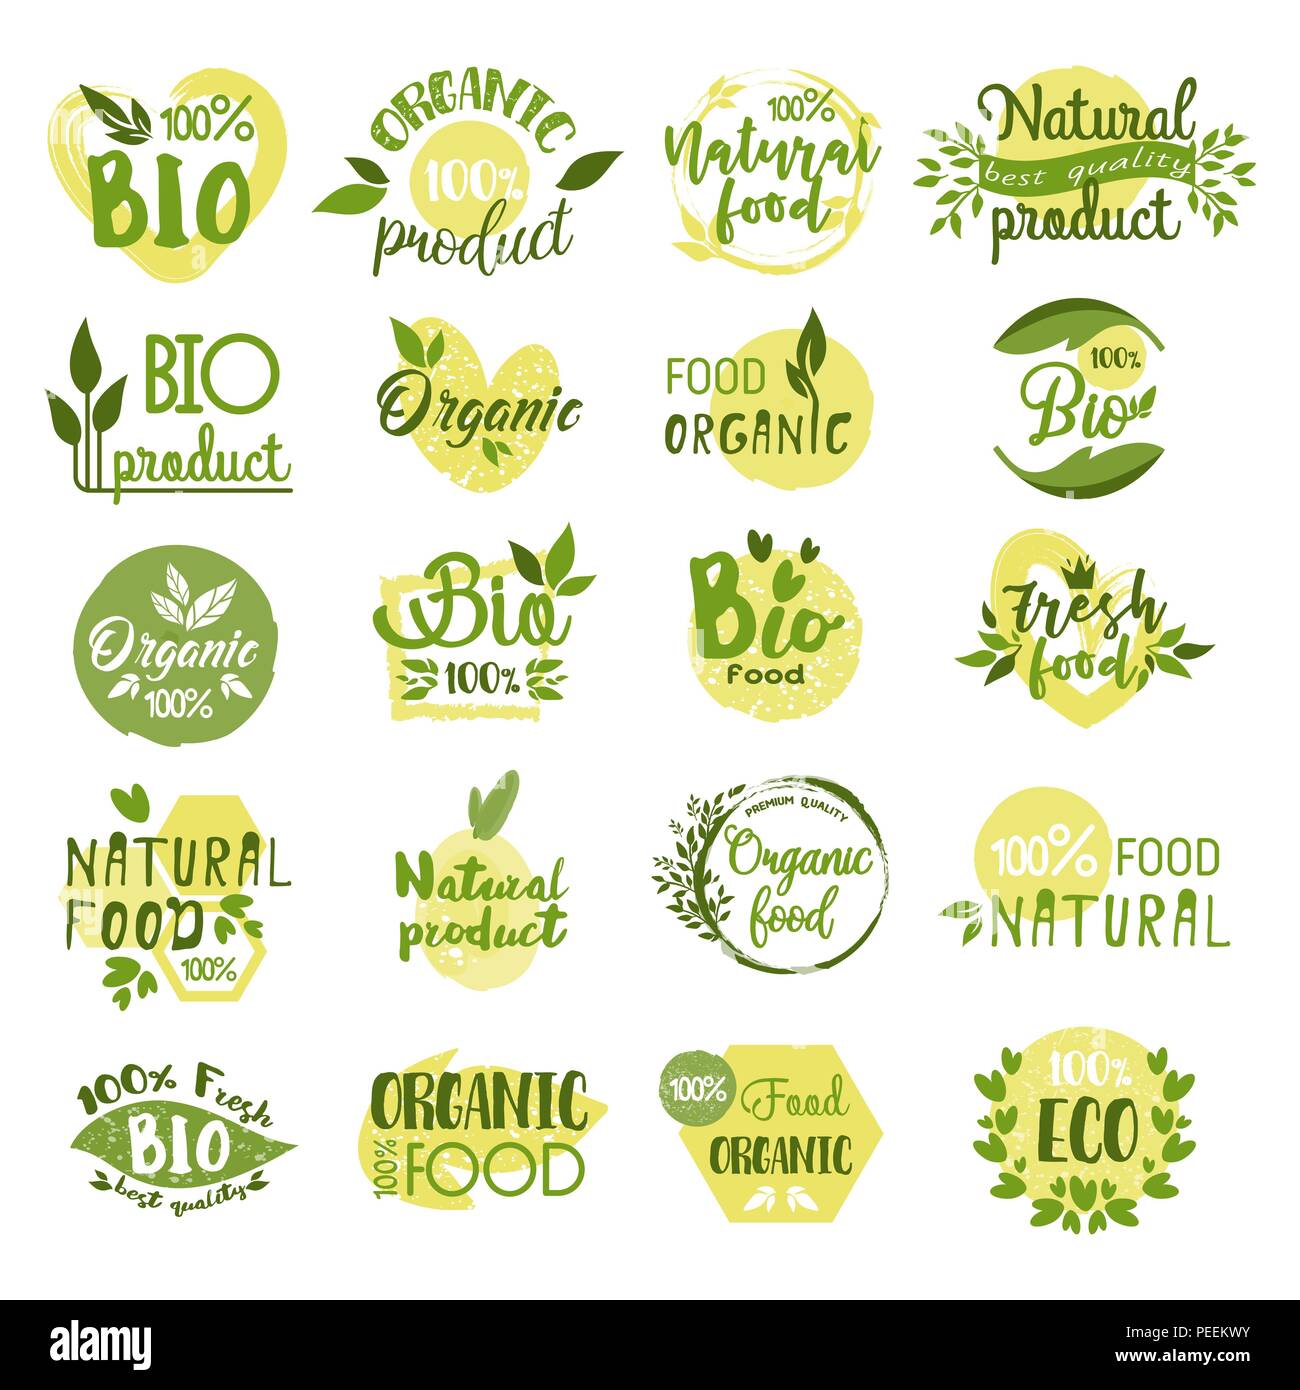 Set of farm food logo, natural product icon with leaves, organic and fresh vegetable or fruit sticker, no gmo guarantee. Nature and health, certified natural nutrition and environment, ecology theme Stock Vector